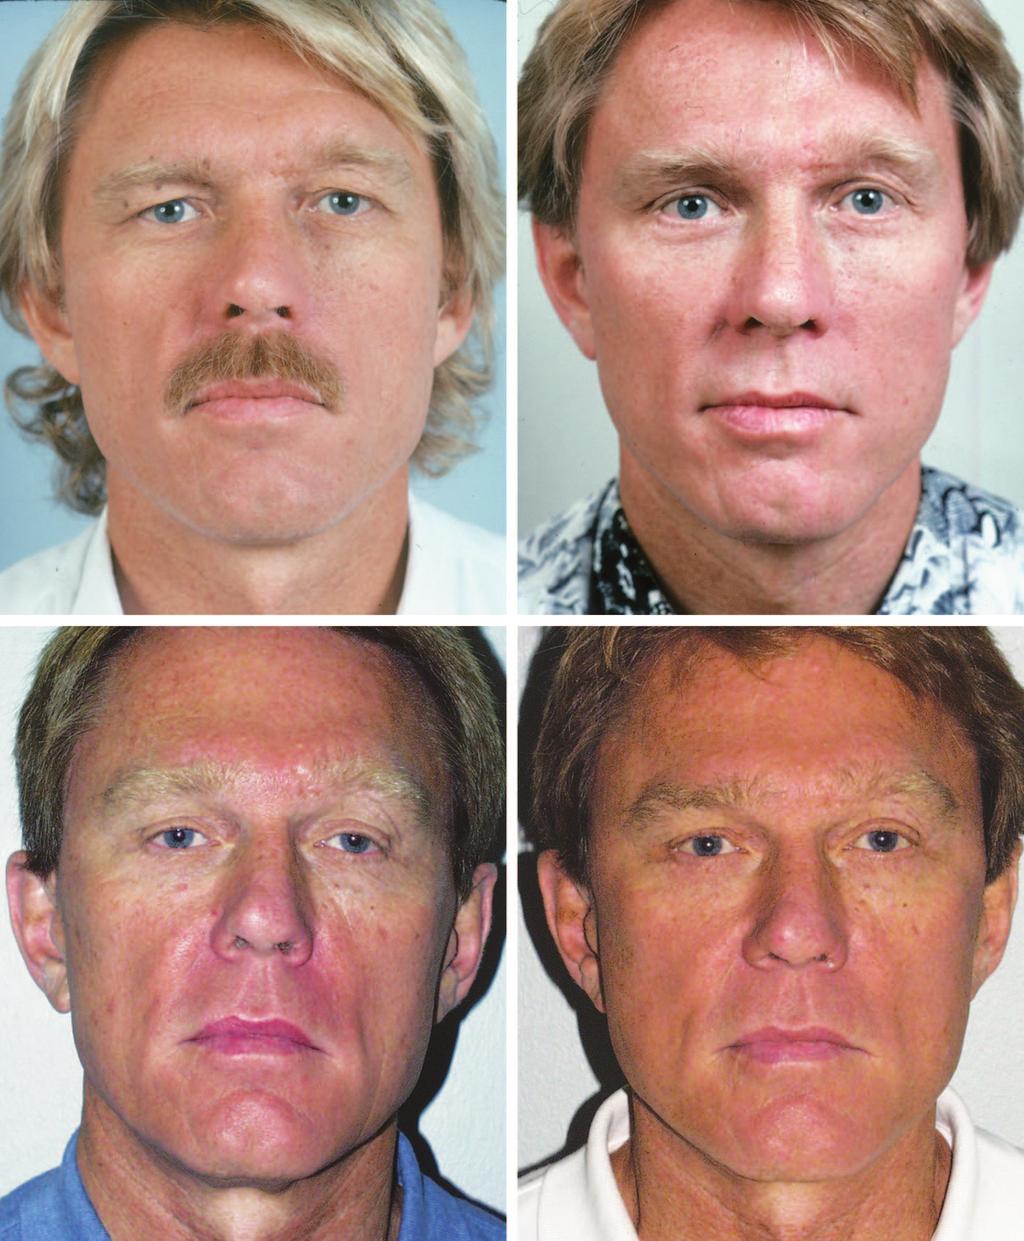 Volume 126, Number 1 Longevity of SMAS Surgery ness of the digastric muscle. Patients who report a rapid decline in skin elasticity may need an early secondary face lift.